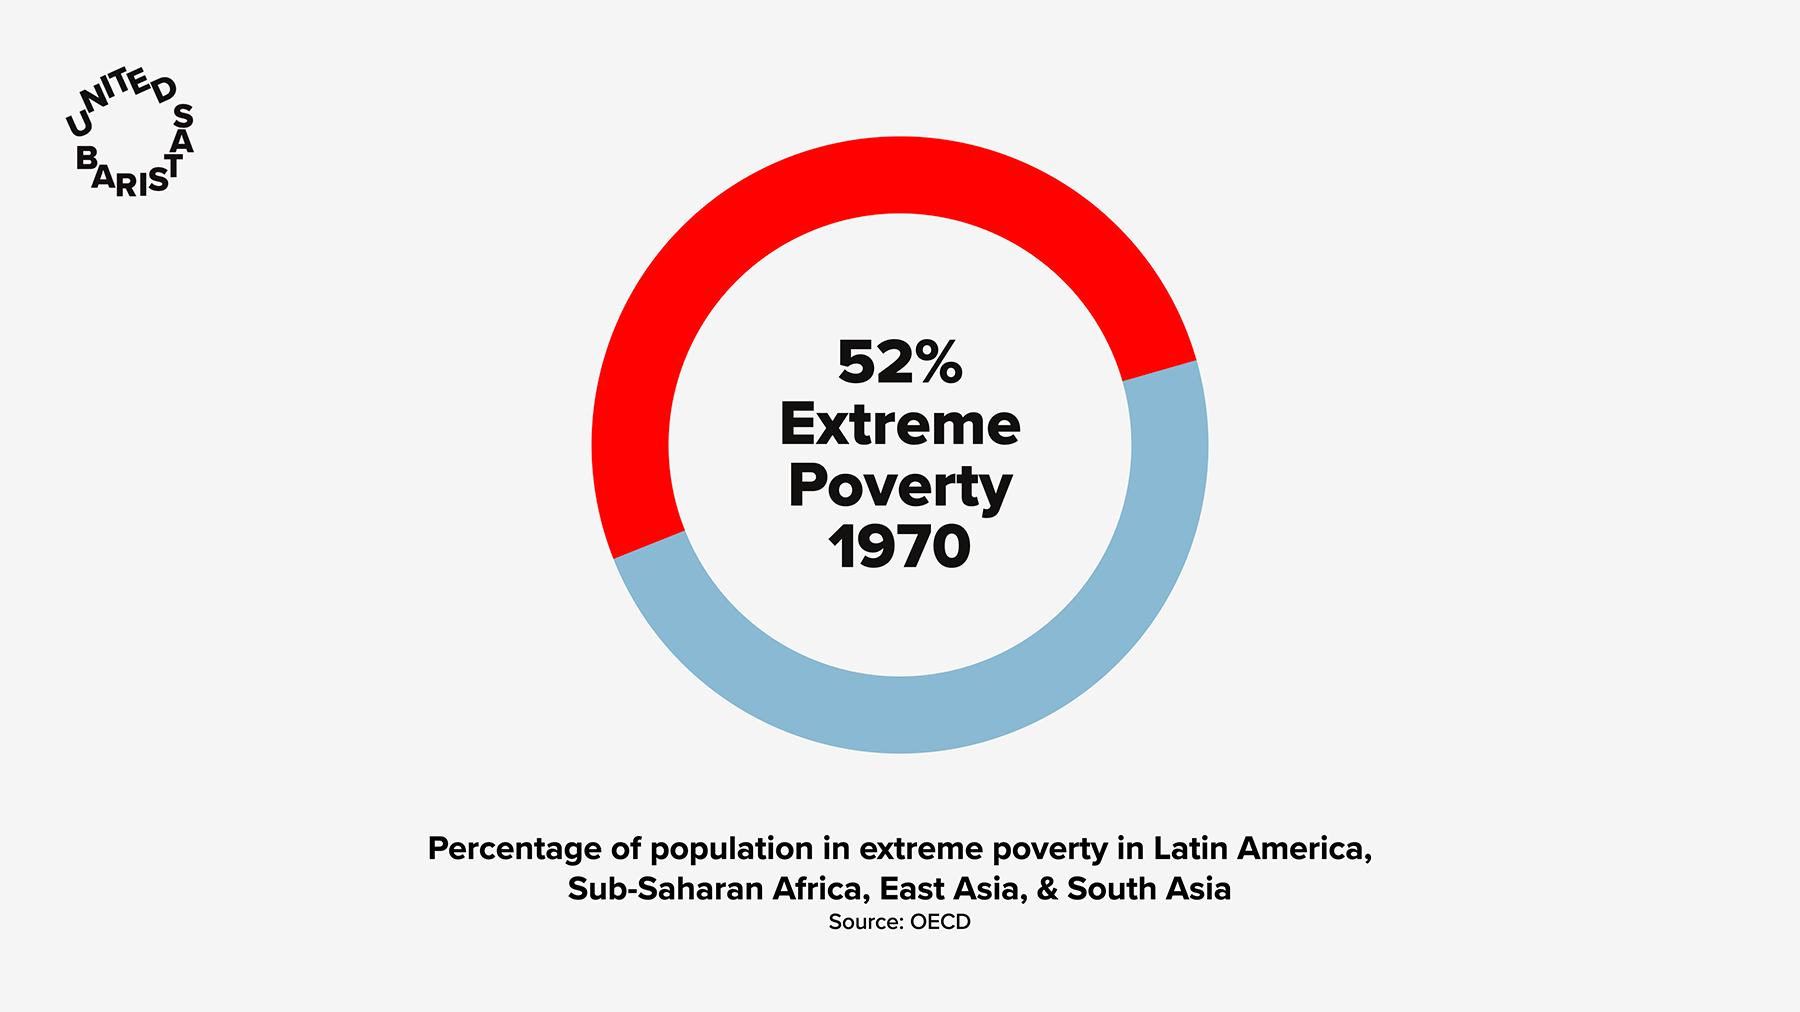 More than half the population living in the coffee-growing regions was living in extreme poverty in 1970.    